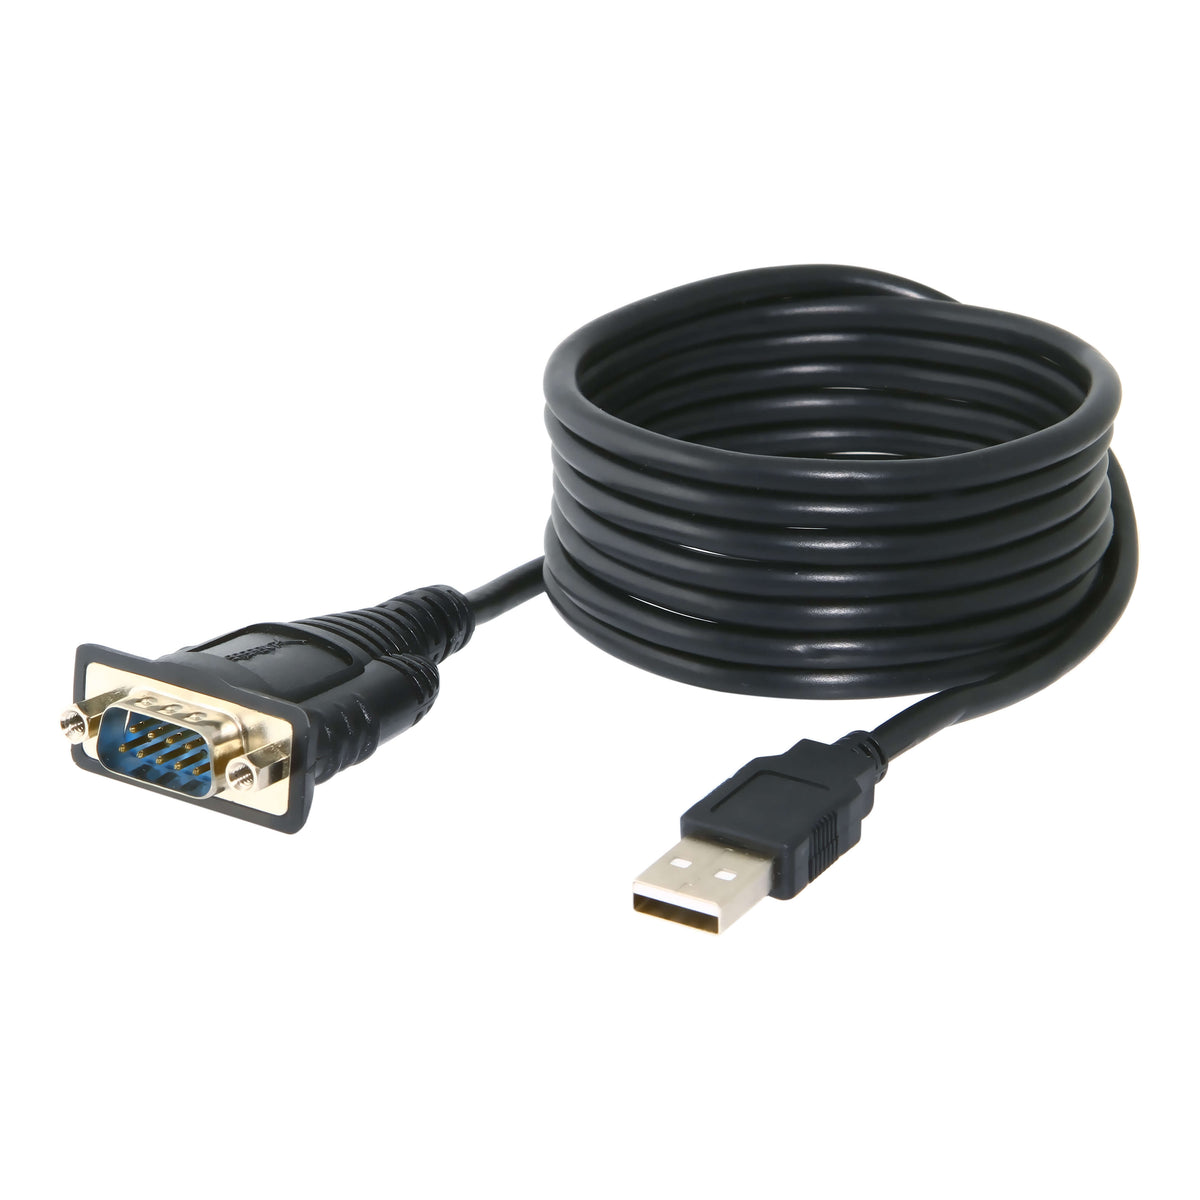 USB 2.0 to Serial 6 ft Adapter Cable (FTDI Chipset)